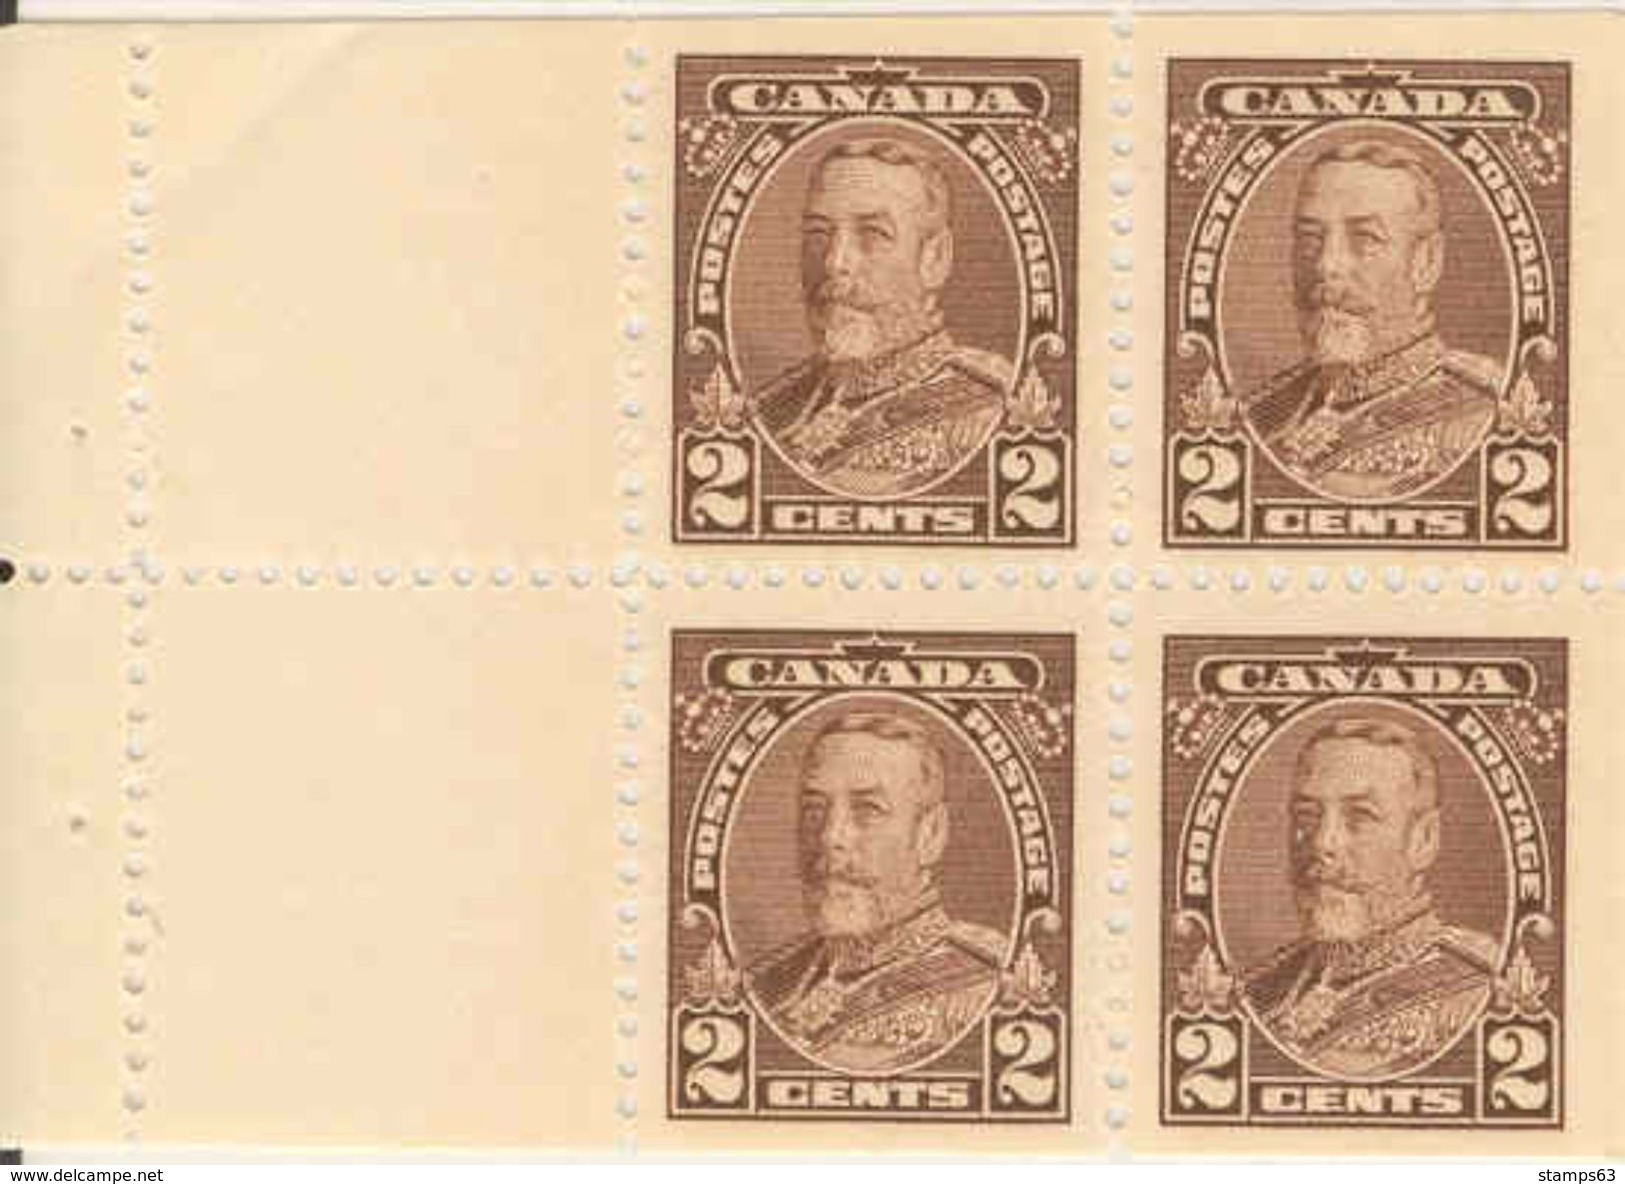 CANADA, 1935, All Bookletpanes Of  25a: 4x1c, 4x2c, 4x3c - Pages De Carnets